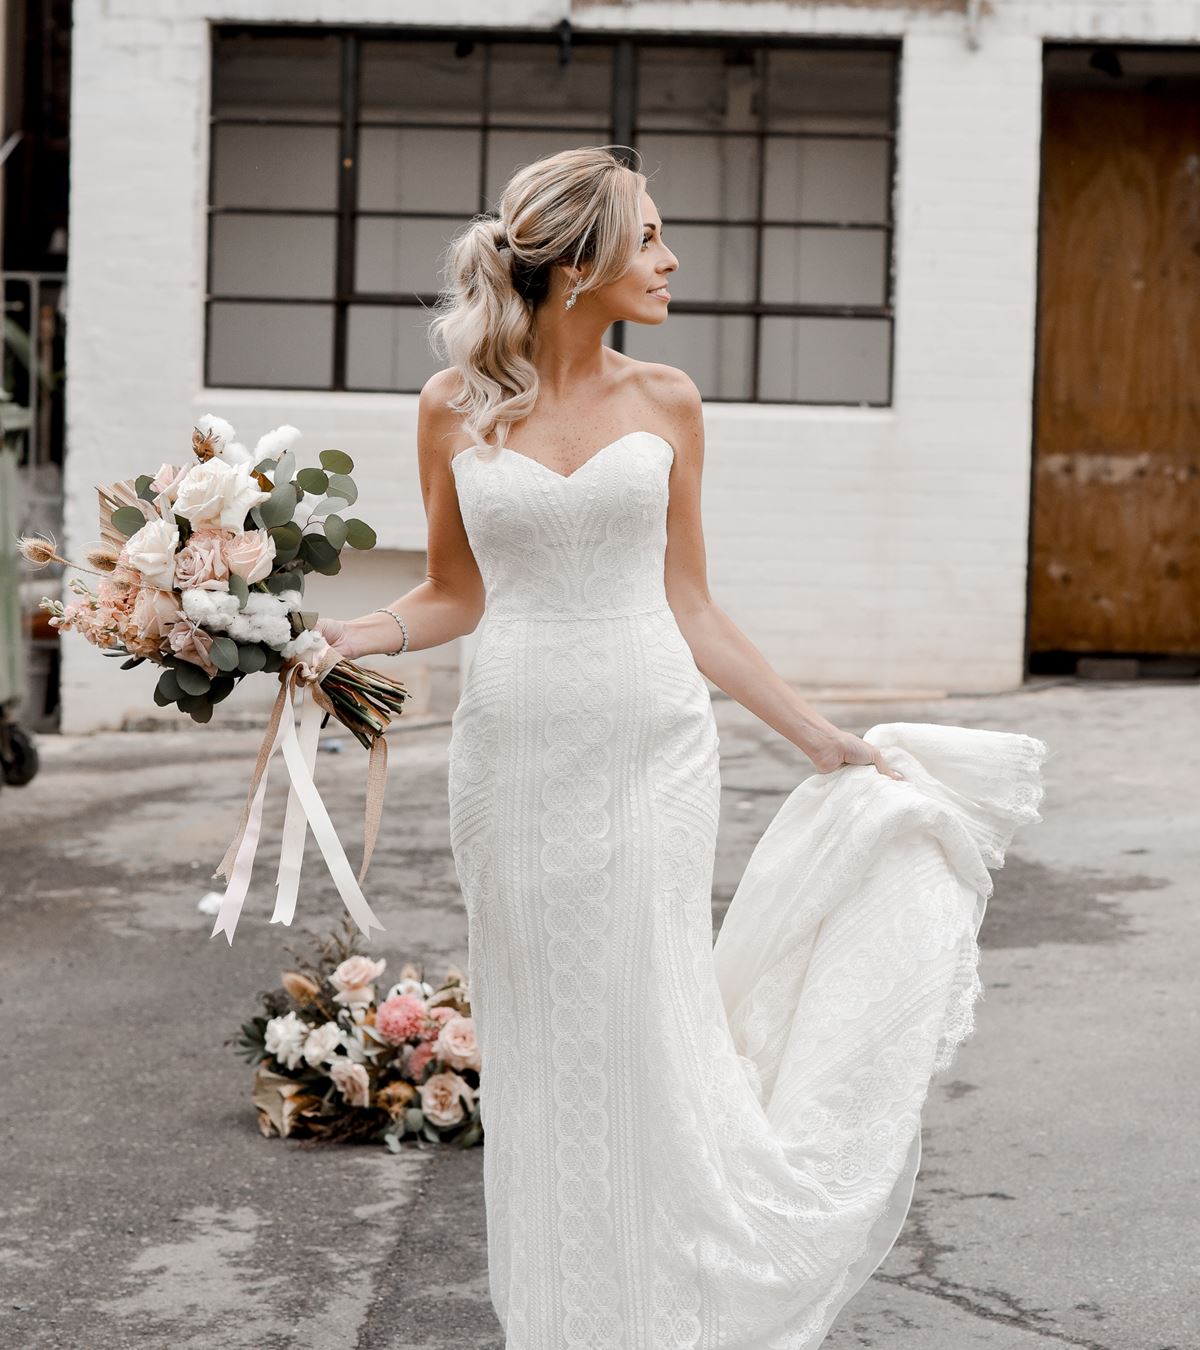 Here's How Much Brides Actually Spend on Wedding Dresses - Average Cost of  a Bridal Gown